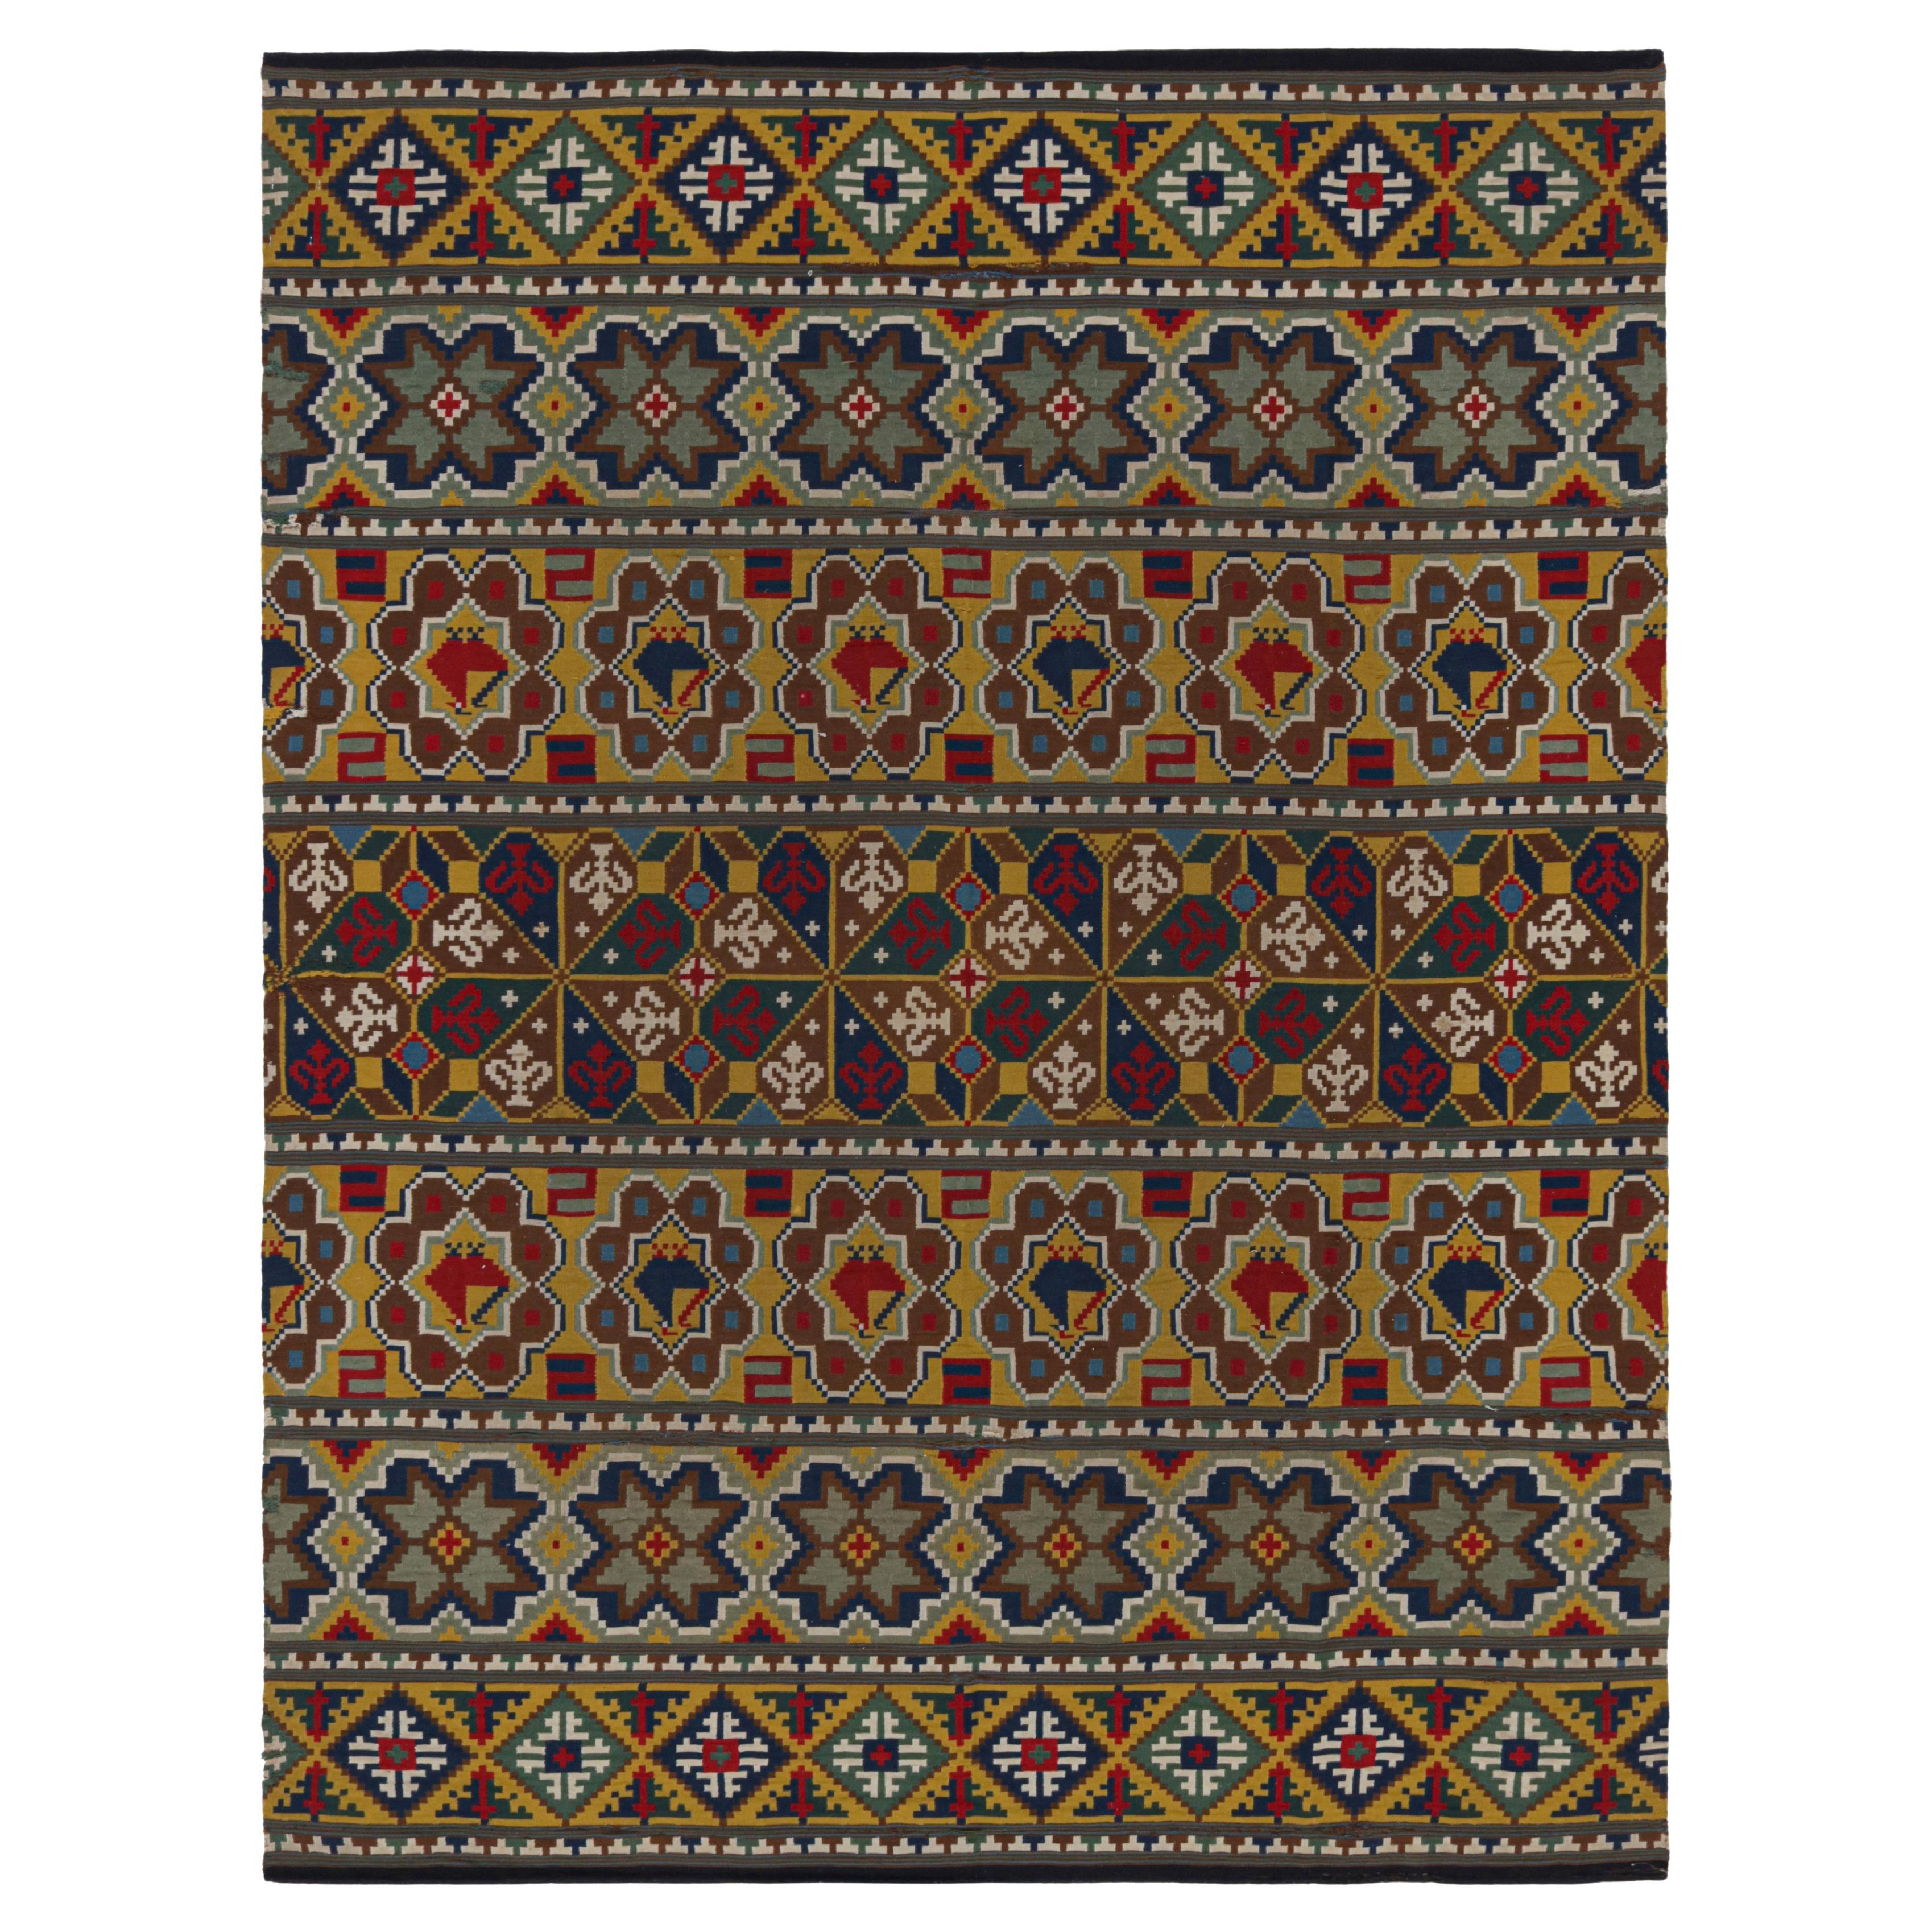 Antique Swedish Textile with Polychromatic Patterns & Pictorial from Rug & Kilim For Sale